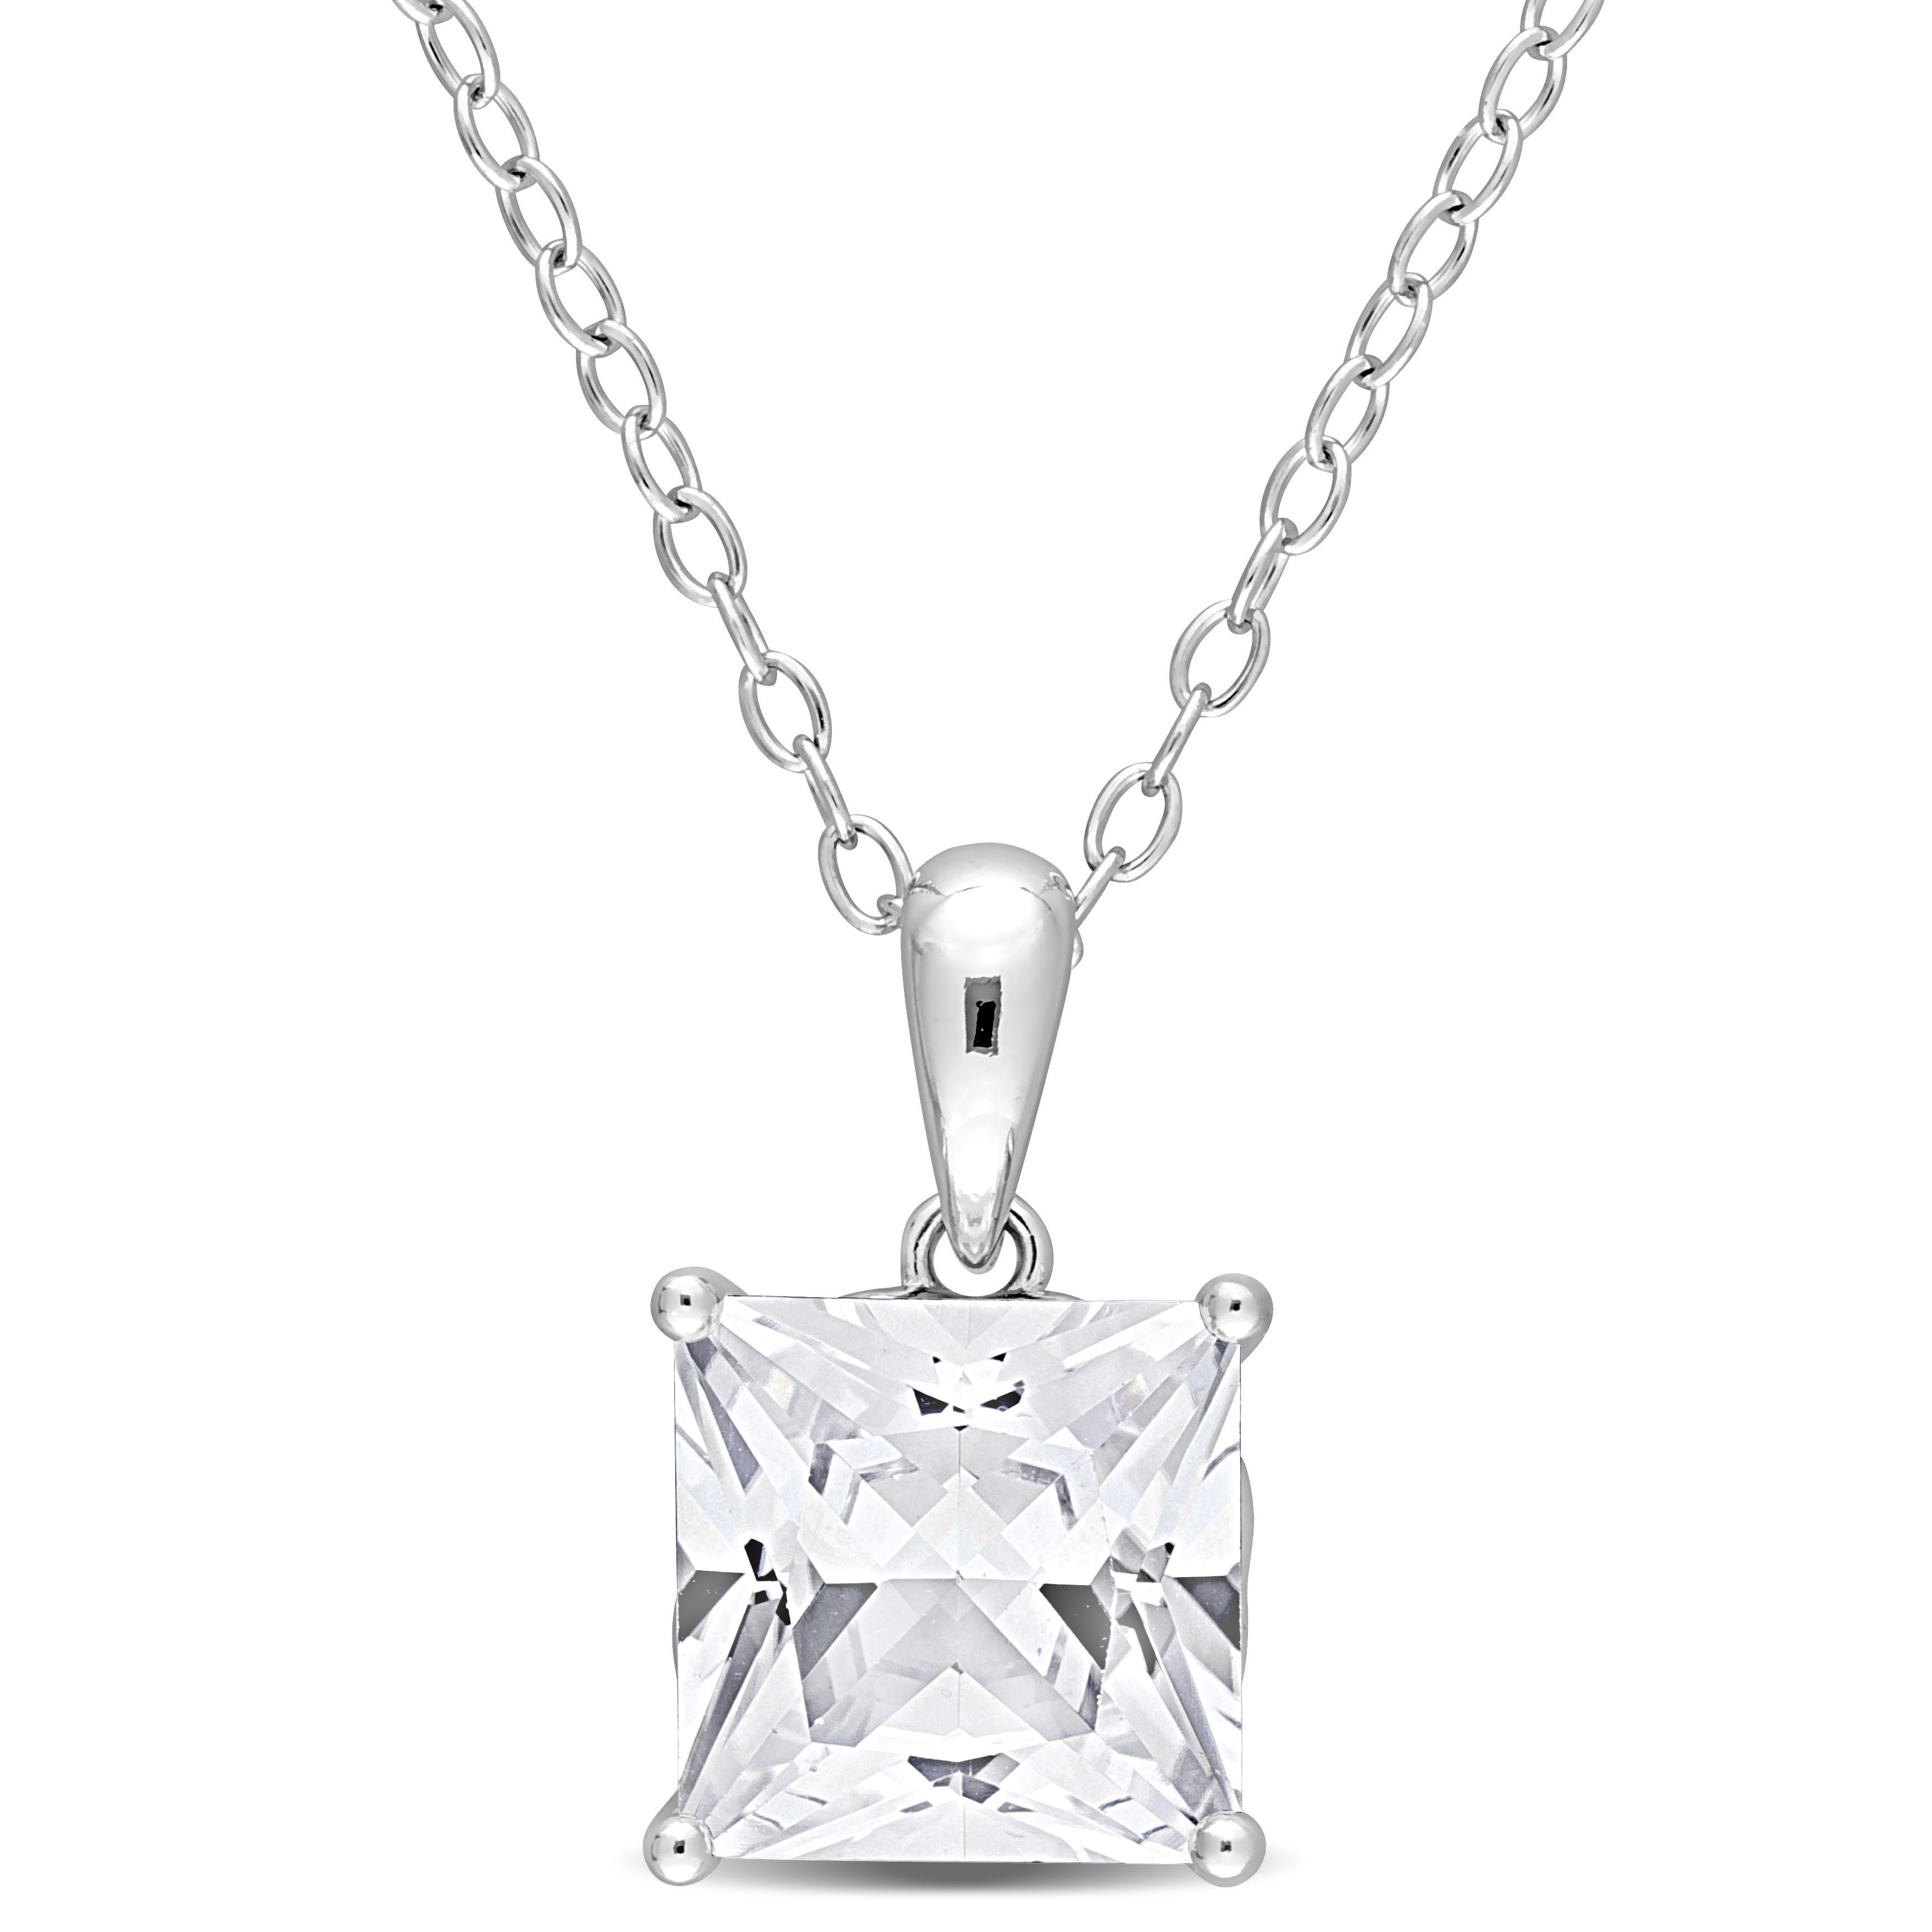 3.06 CT TGW Princess Cut Created White Sapphire Solitaire Heart Design Pendant with Chain in Sterling Silver - 18 in.